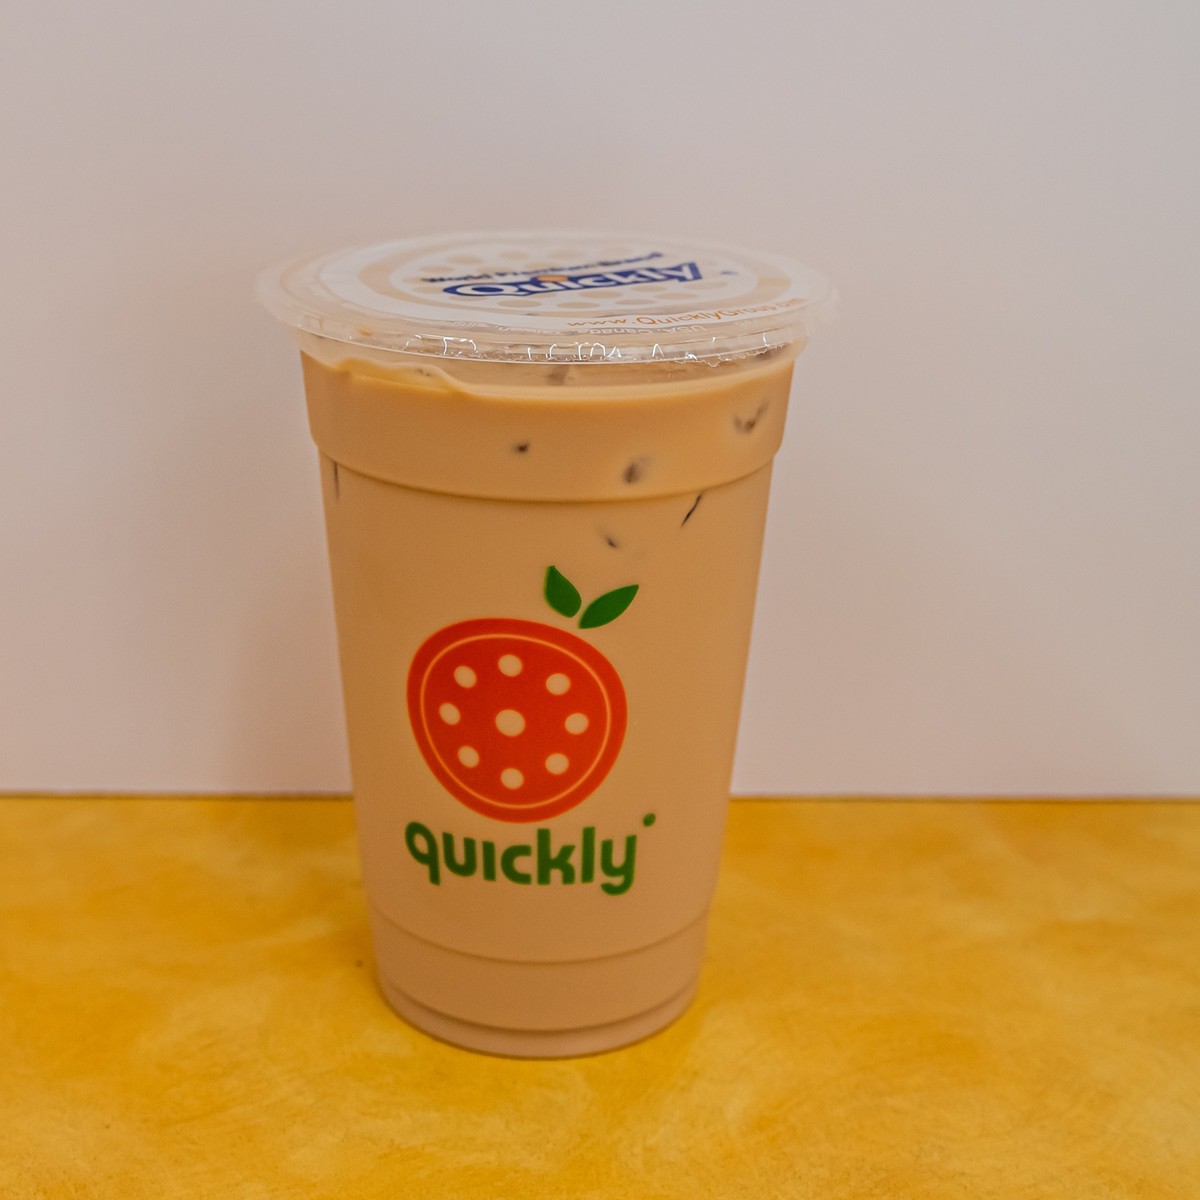 Bubble Crush - New drinks available now,Strawberry tea w